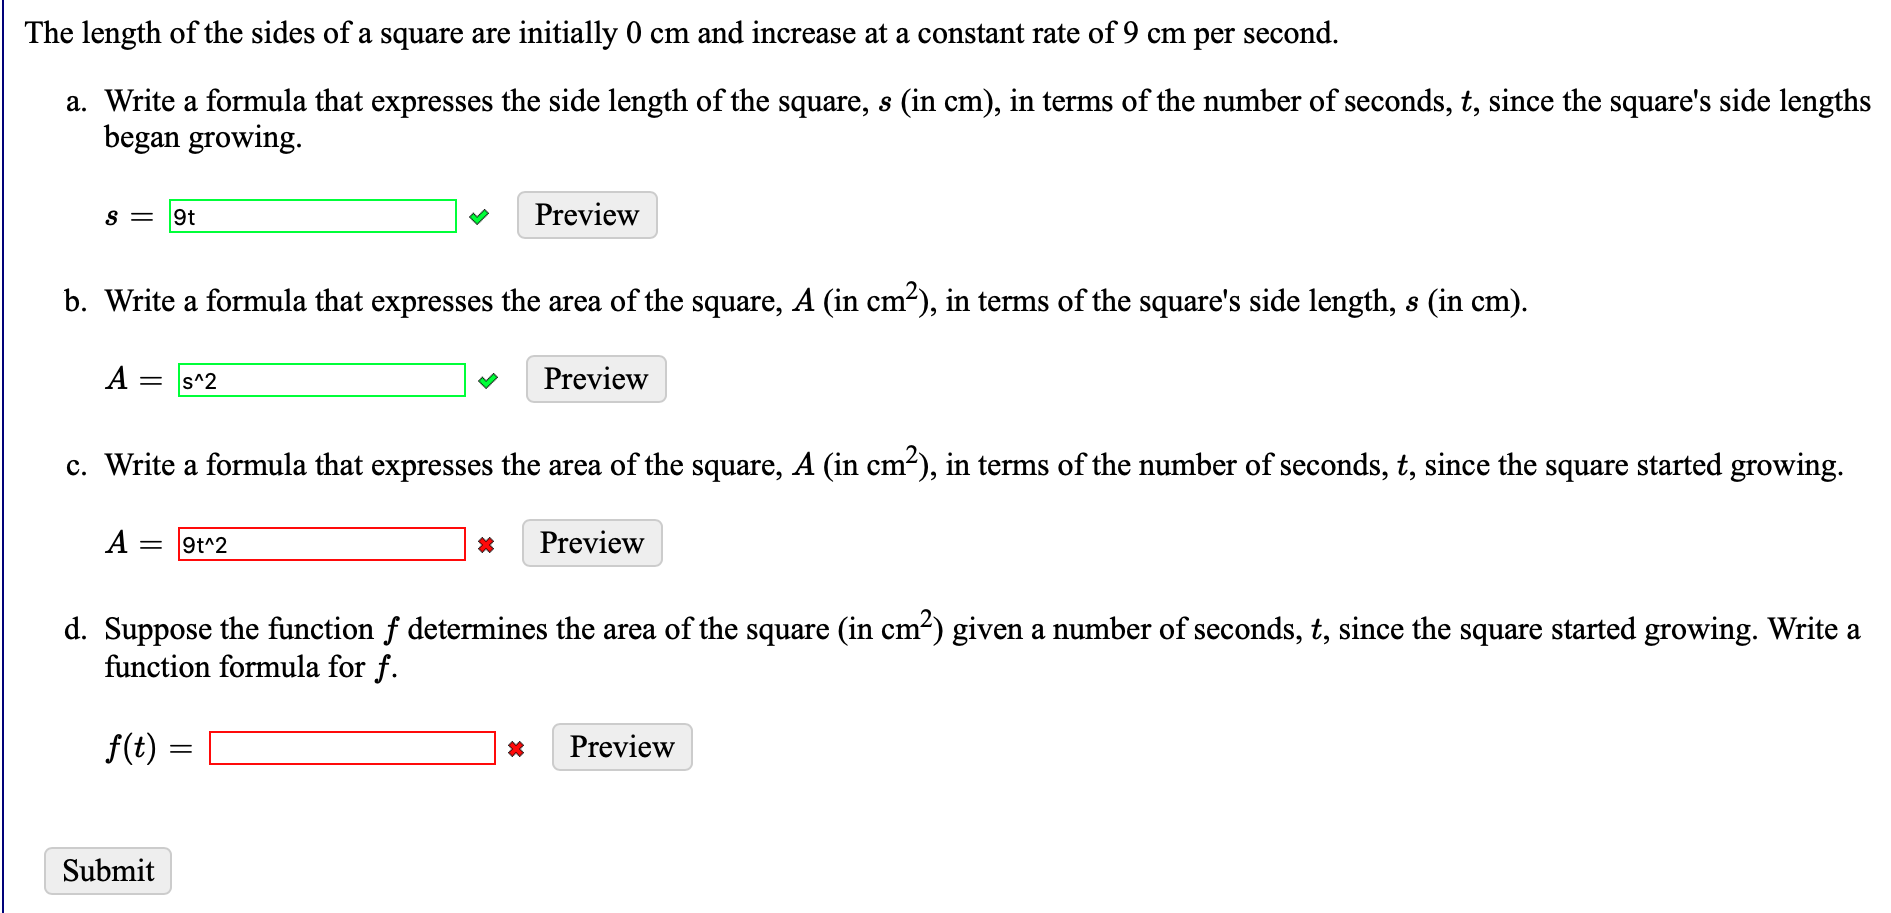 The length of the sides of a square are initially 0 cm and increase at a constant rate of 9 cm per second.
a. Write a formula that expresses the side length of the square, s (in cm), in terms of the number of seconds, t, since the square's side lengths
began growing.
9t
Preview
b. Write a formula that expresses the area of the square, A (in cm-), in terms of the square's side length, s (in cm).
A
s^2
Preview
||
c. Write a formula that expresses the area of the square, A (in cm?), in terms of the number of seconds, t, since the square started growing.
A =
9t^2
Preview
d. Suppose the function f determines the area of the square (in cm²) given a number of seconds, t, since the square started growing. Write a
function formula for f.
f(t)
Preview
